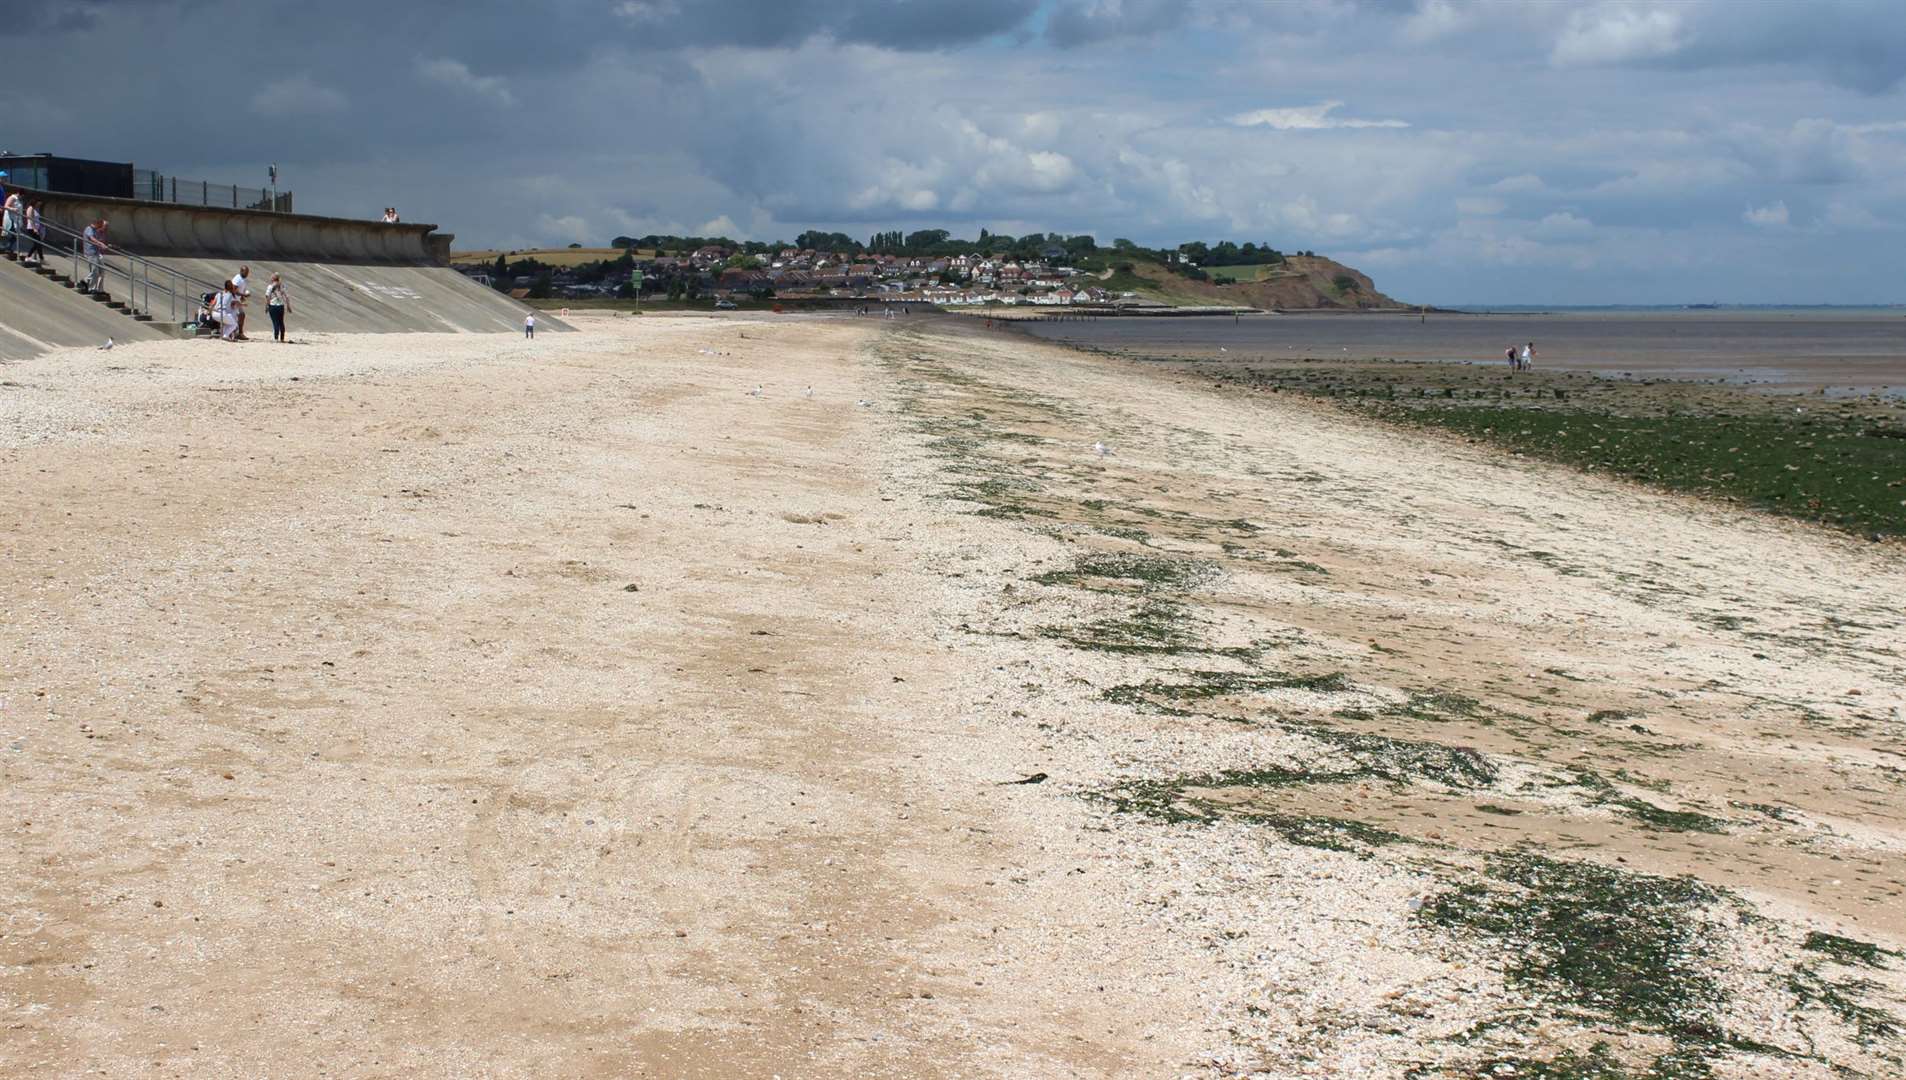 The Isle of Sheppey is home to Blue Flag beaches